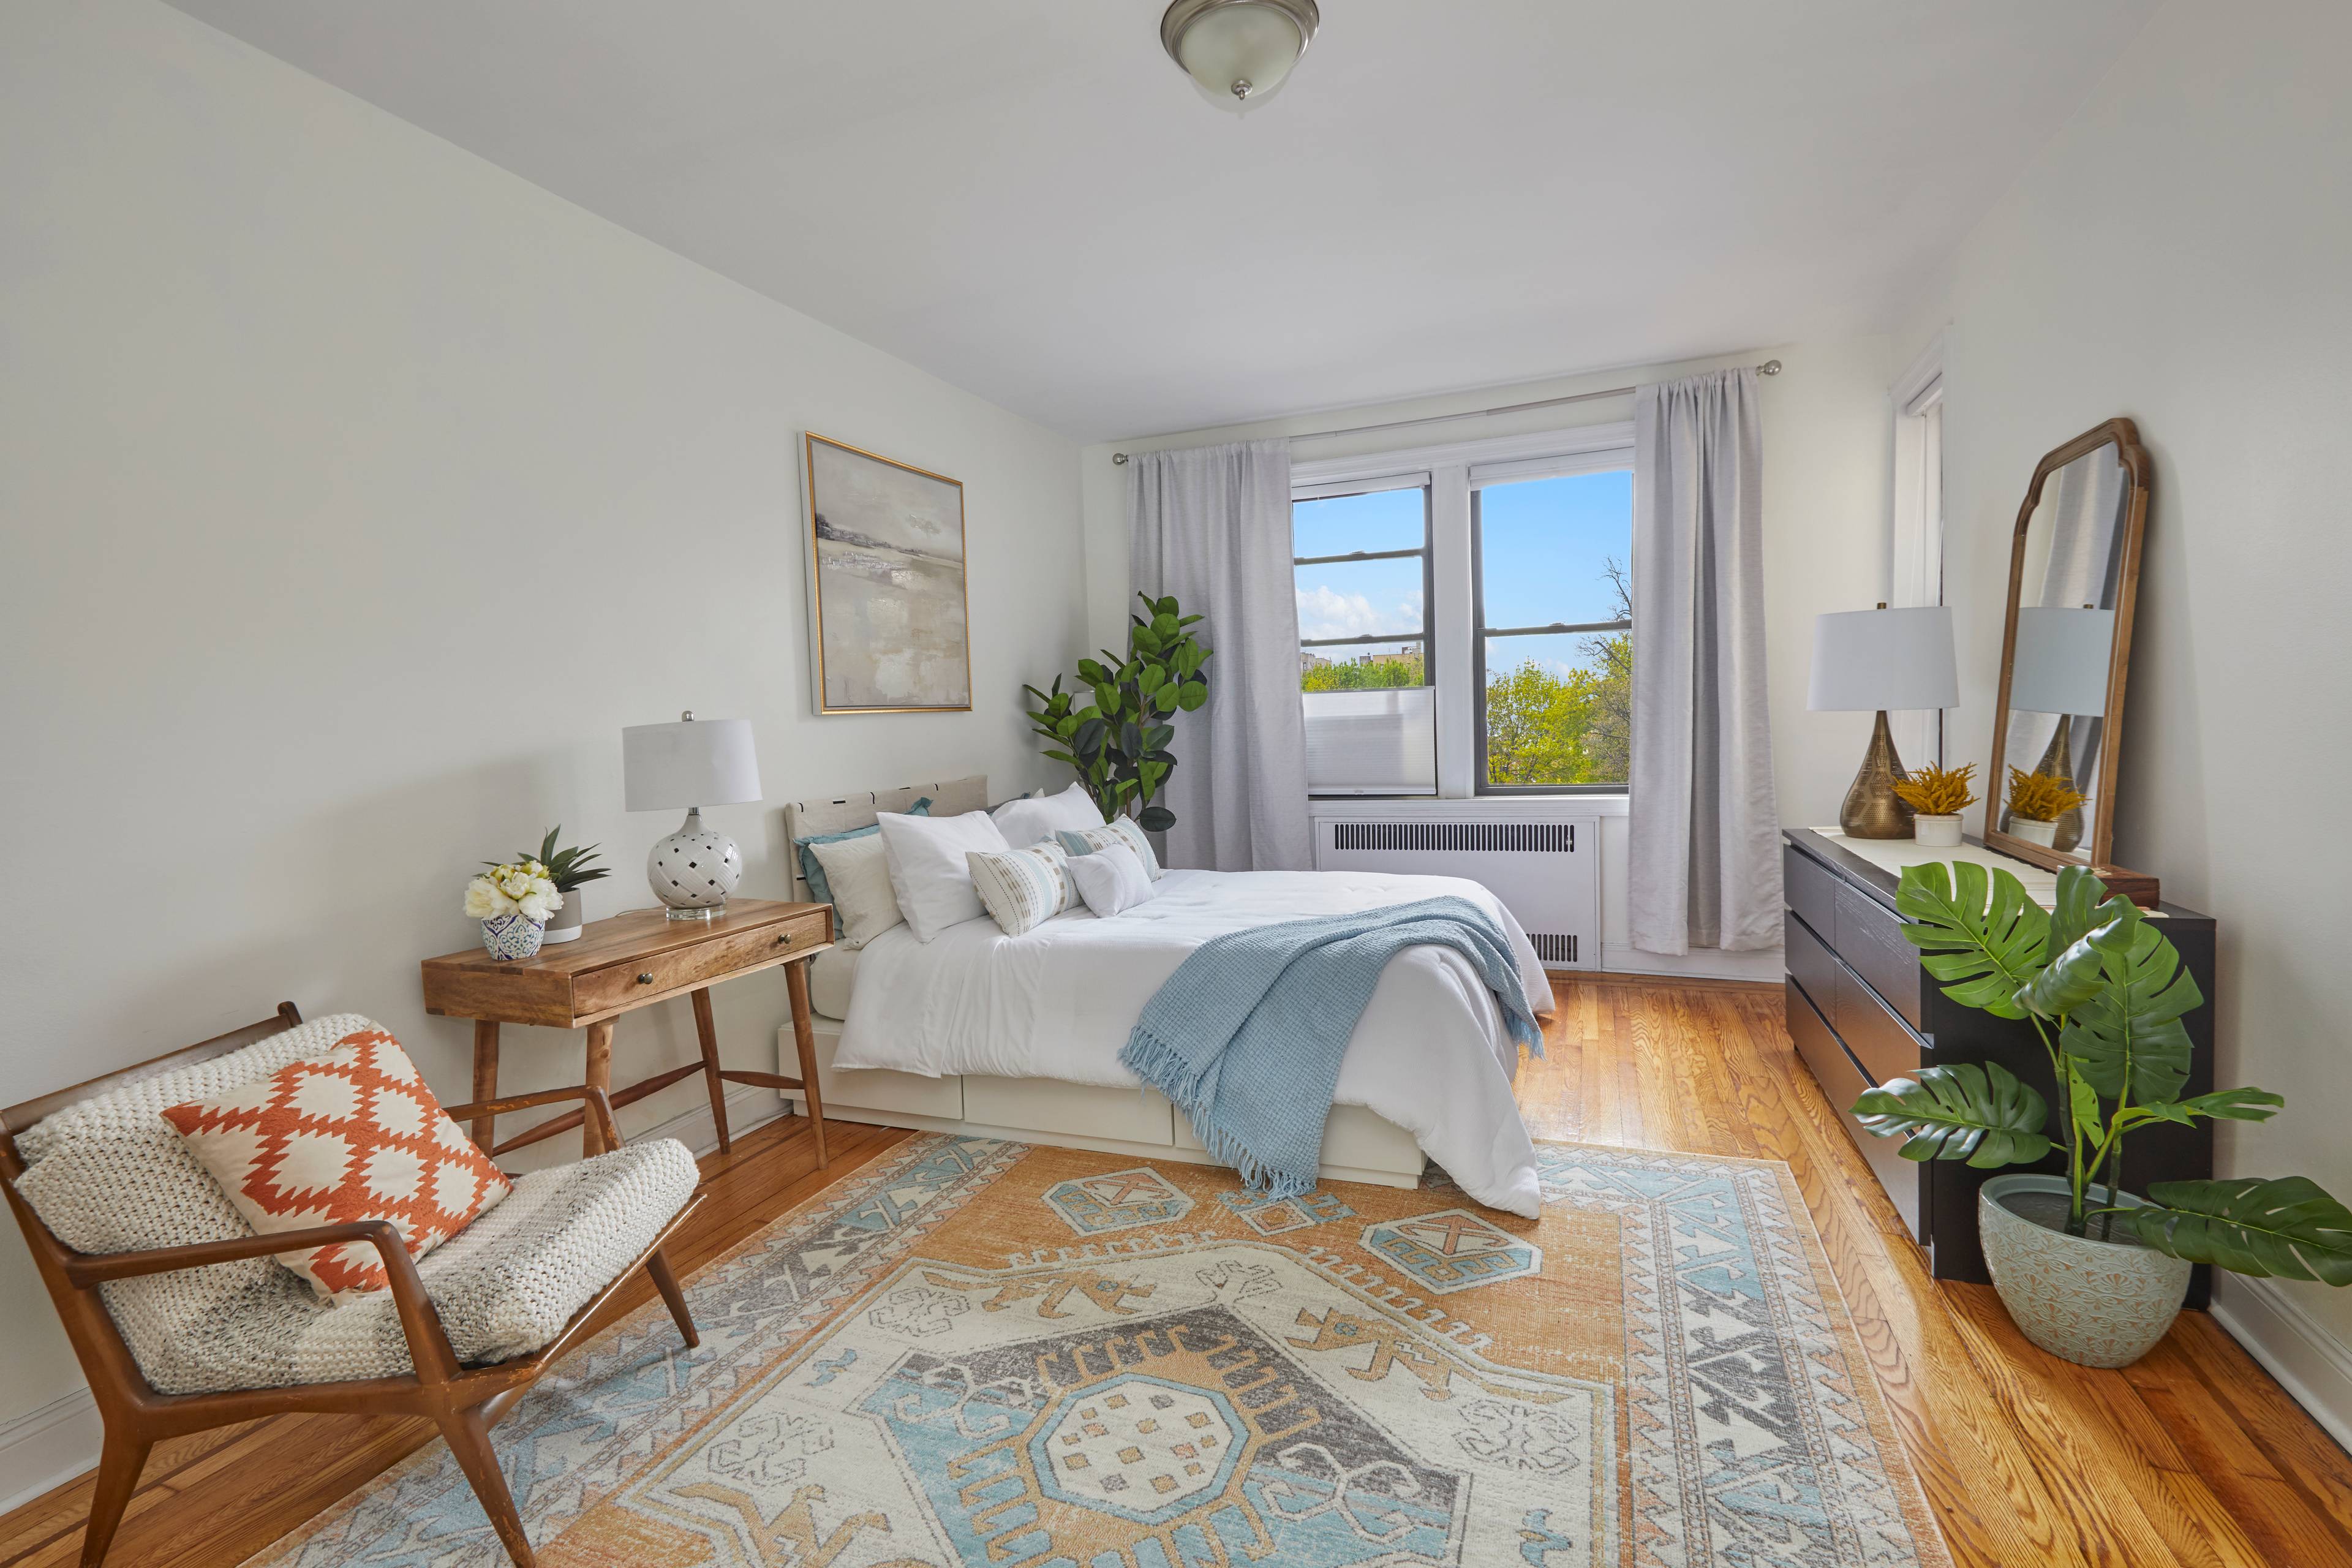 Spacious and bright extra Large one bedroom, one bath apartment located in historic Prospect Lefferts Gardens and only 2 short blocks from Prospect Park.